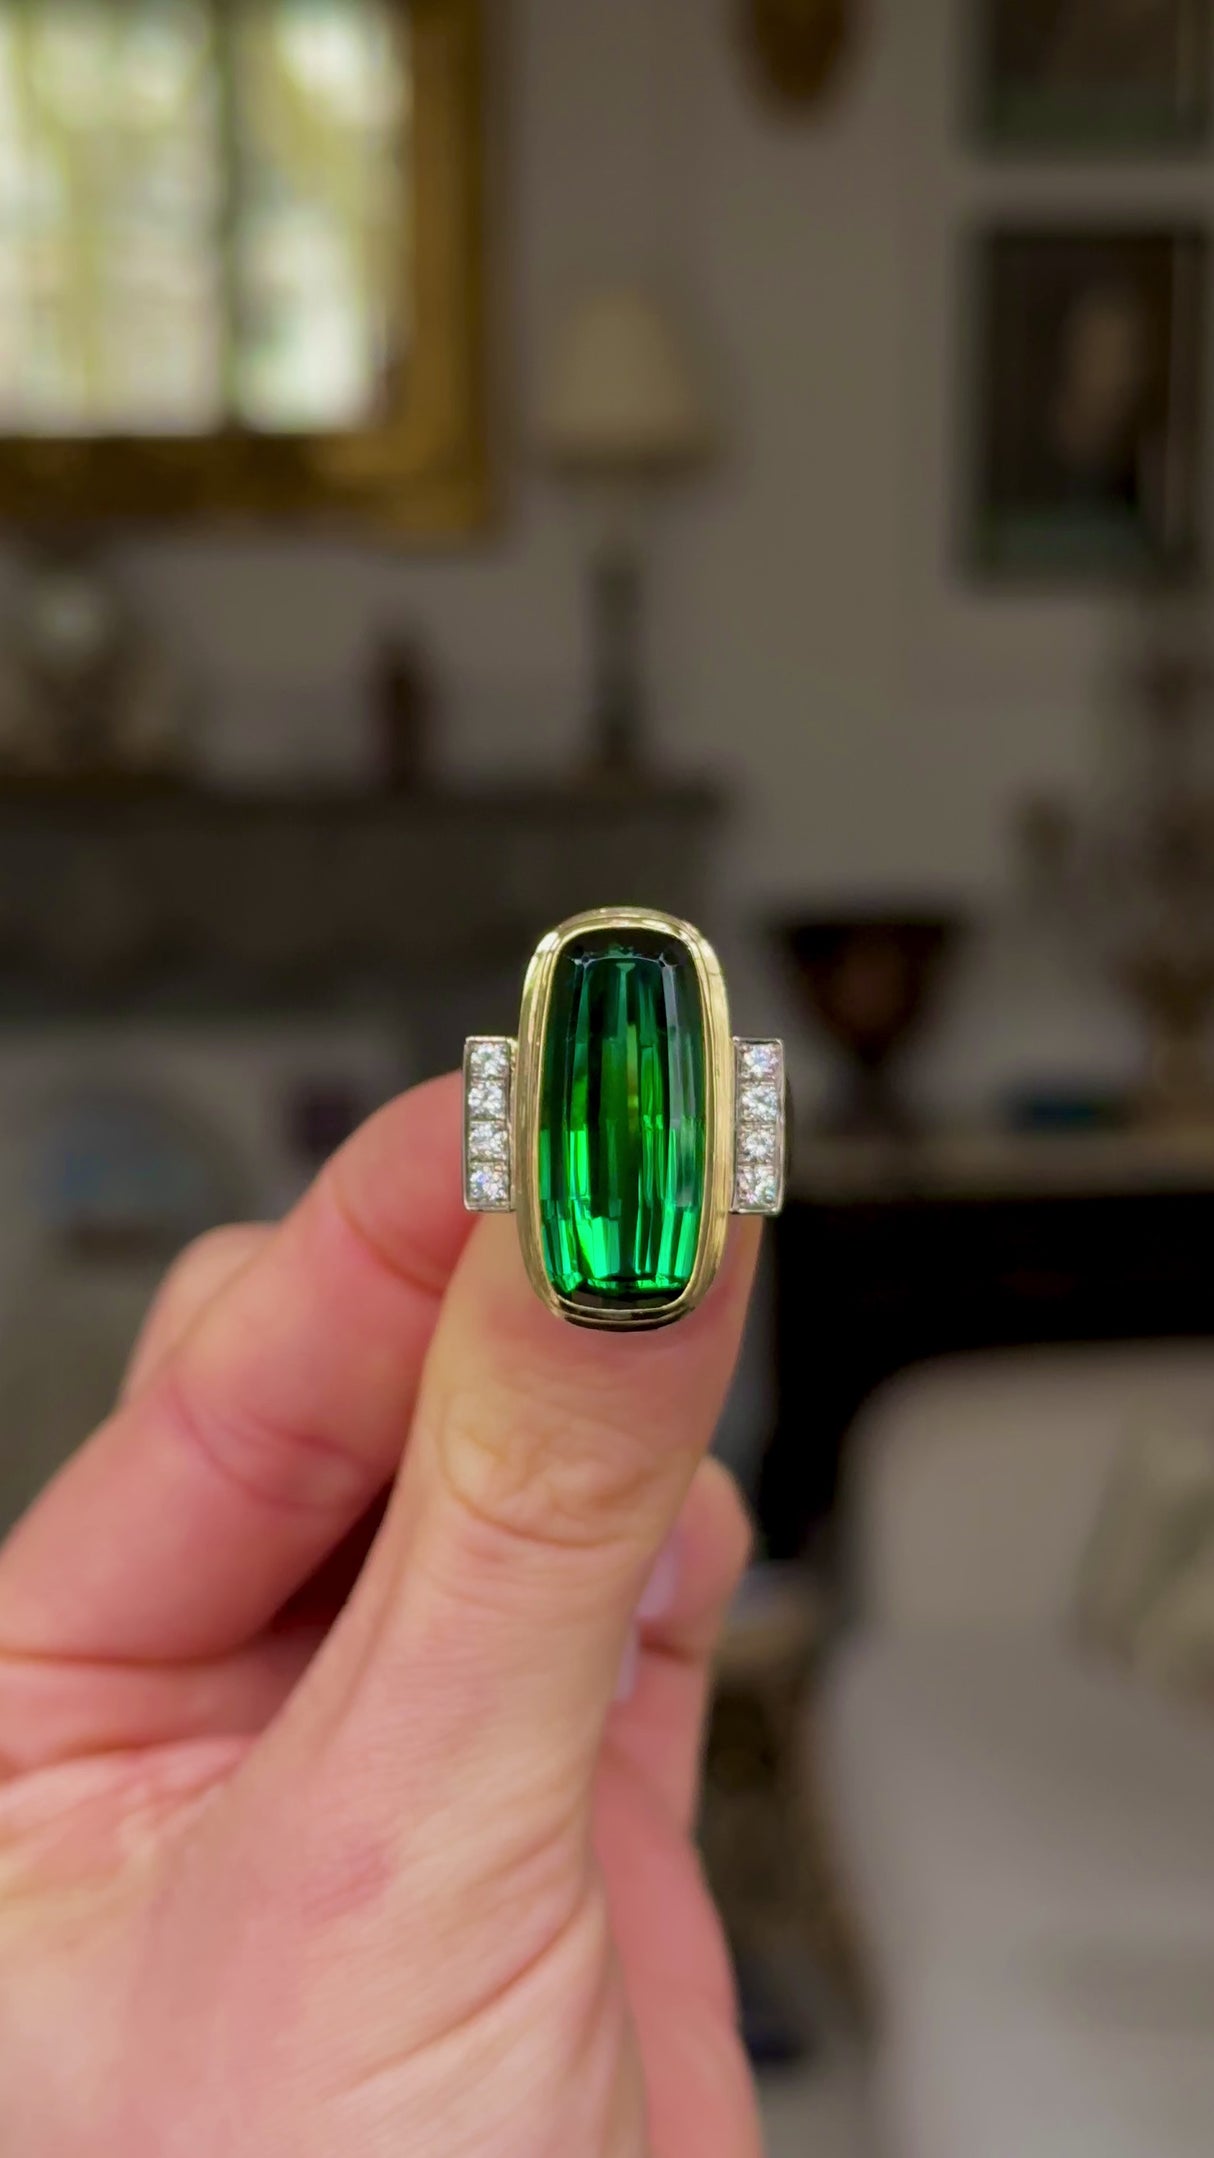 Vintage, Tourmaline and Diamond Cocktail Ring, held in fingers and rotated to give perspective.